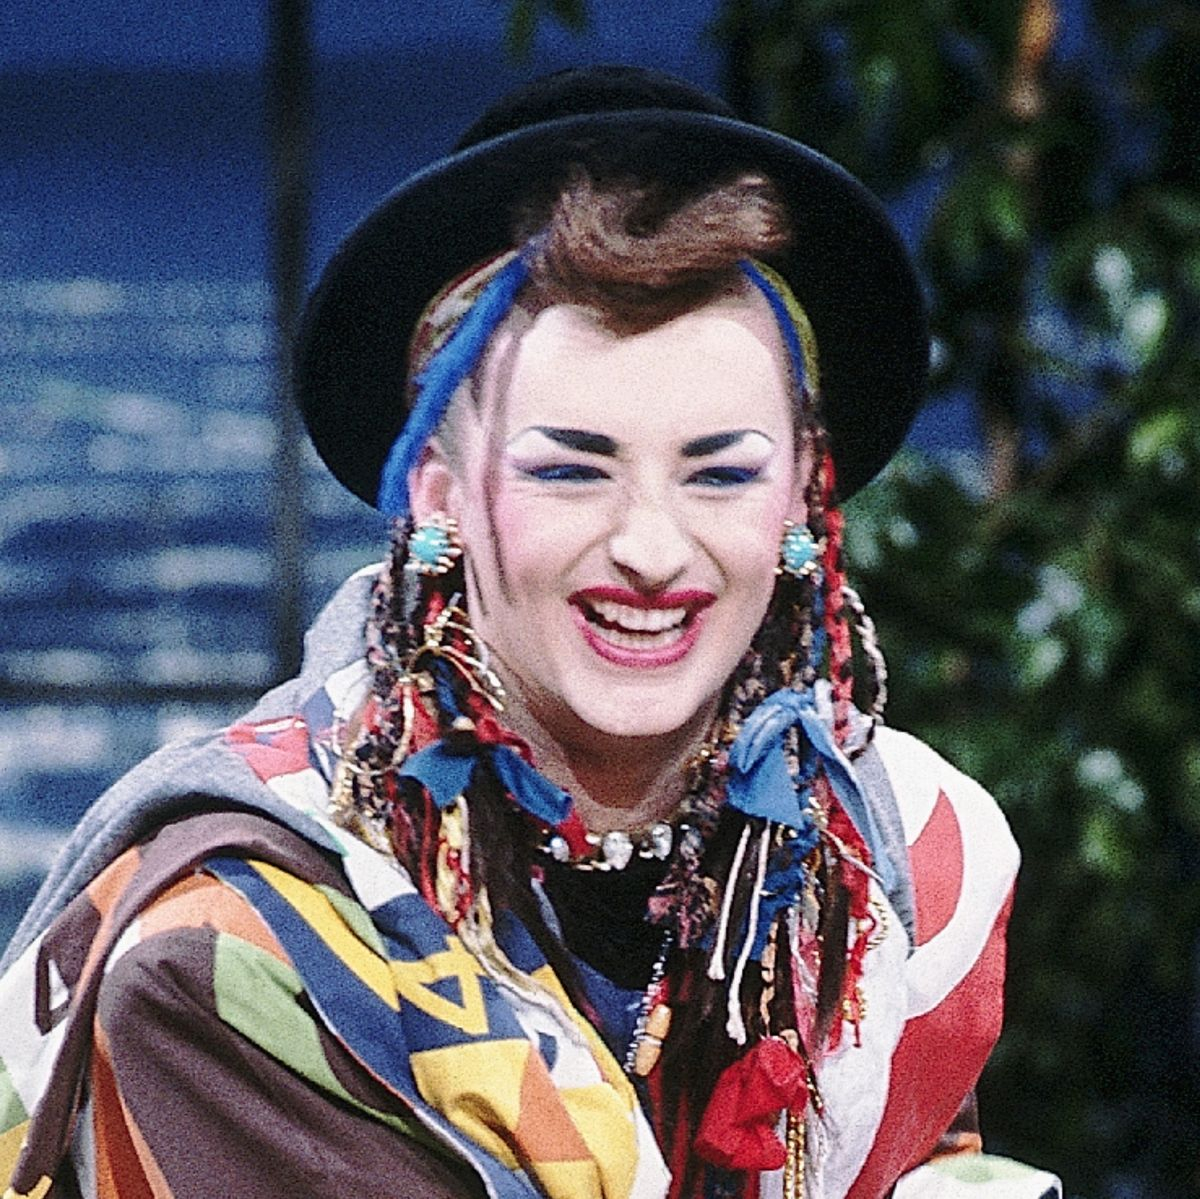 Boy George in the 80s